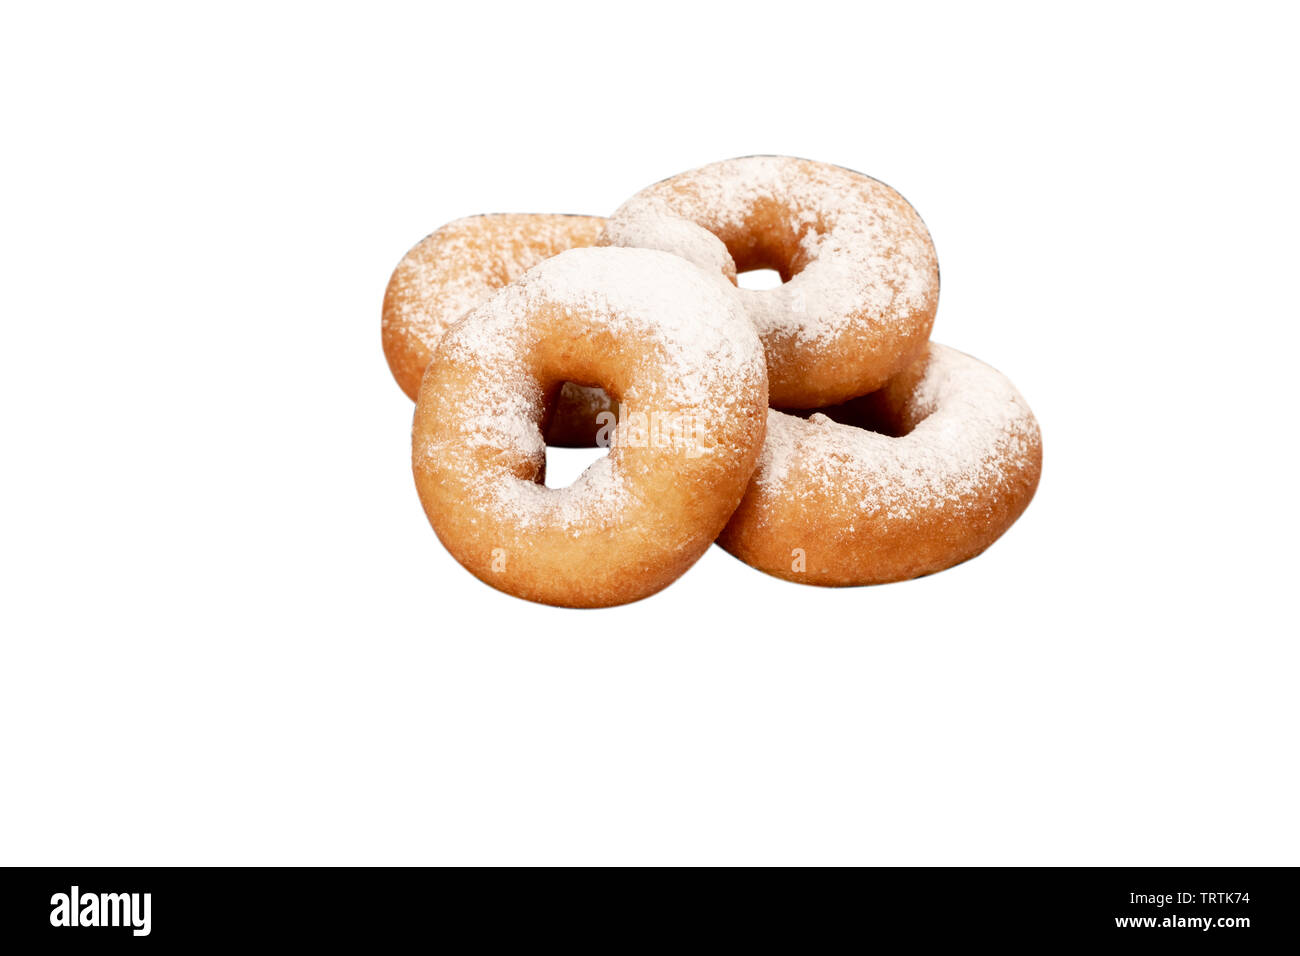 Juicy fresh donuts covered with powdered sugar on a white background isolated without a plate. Stock Photo